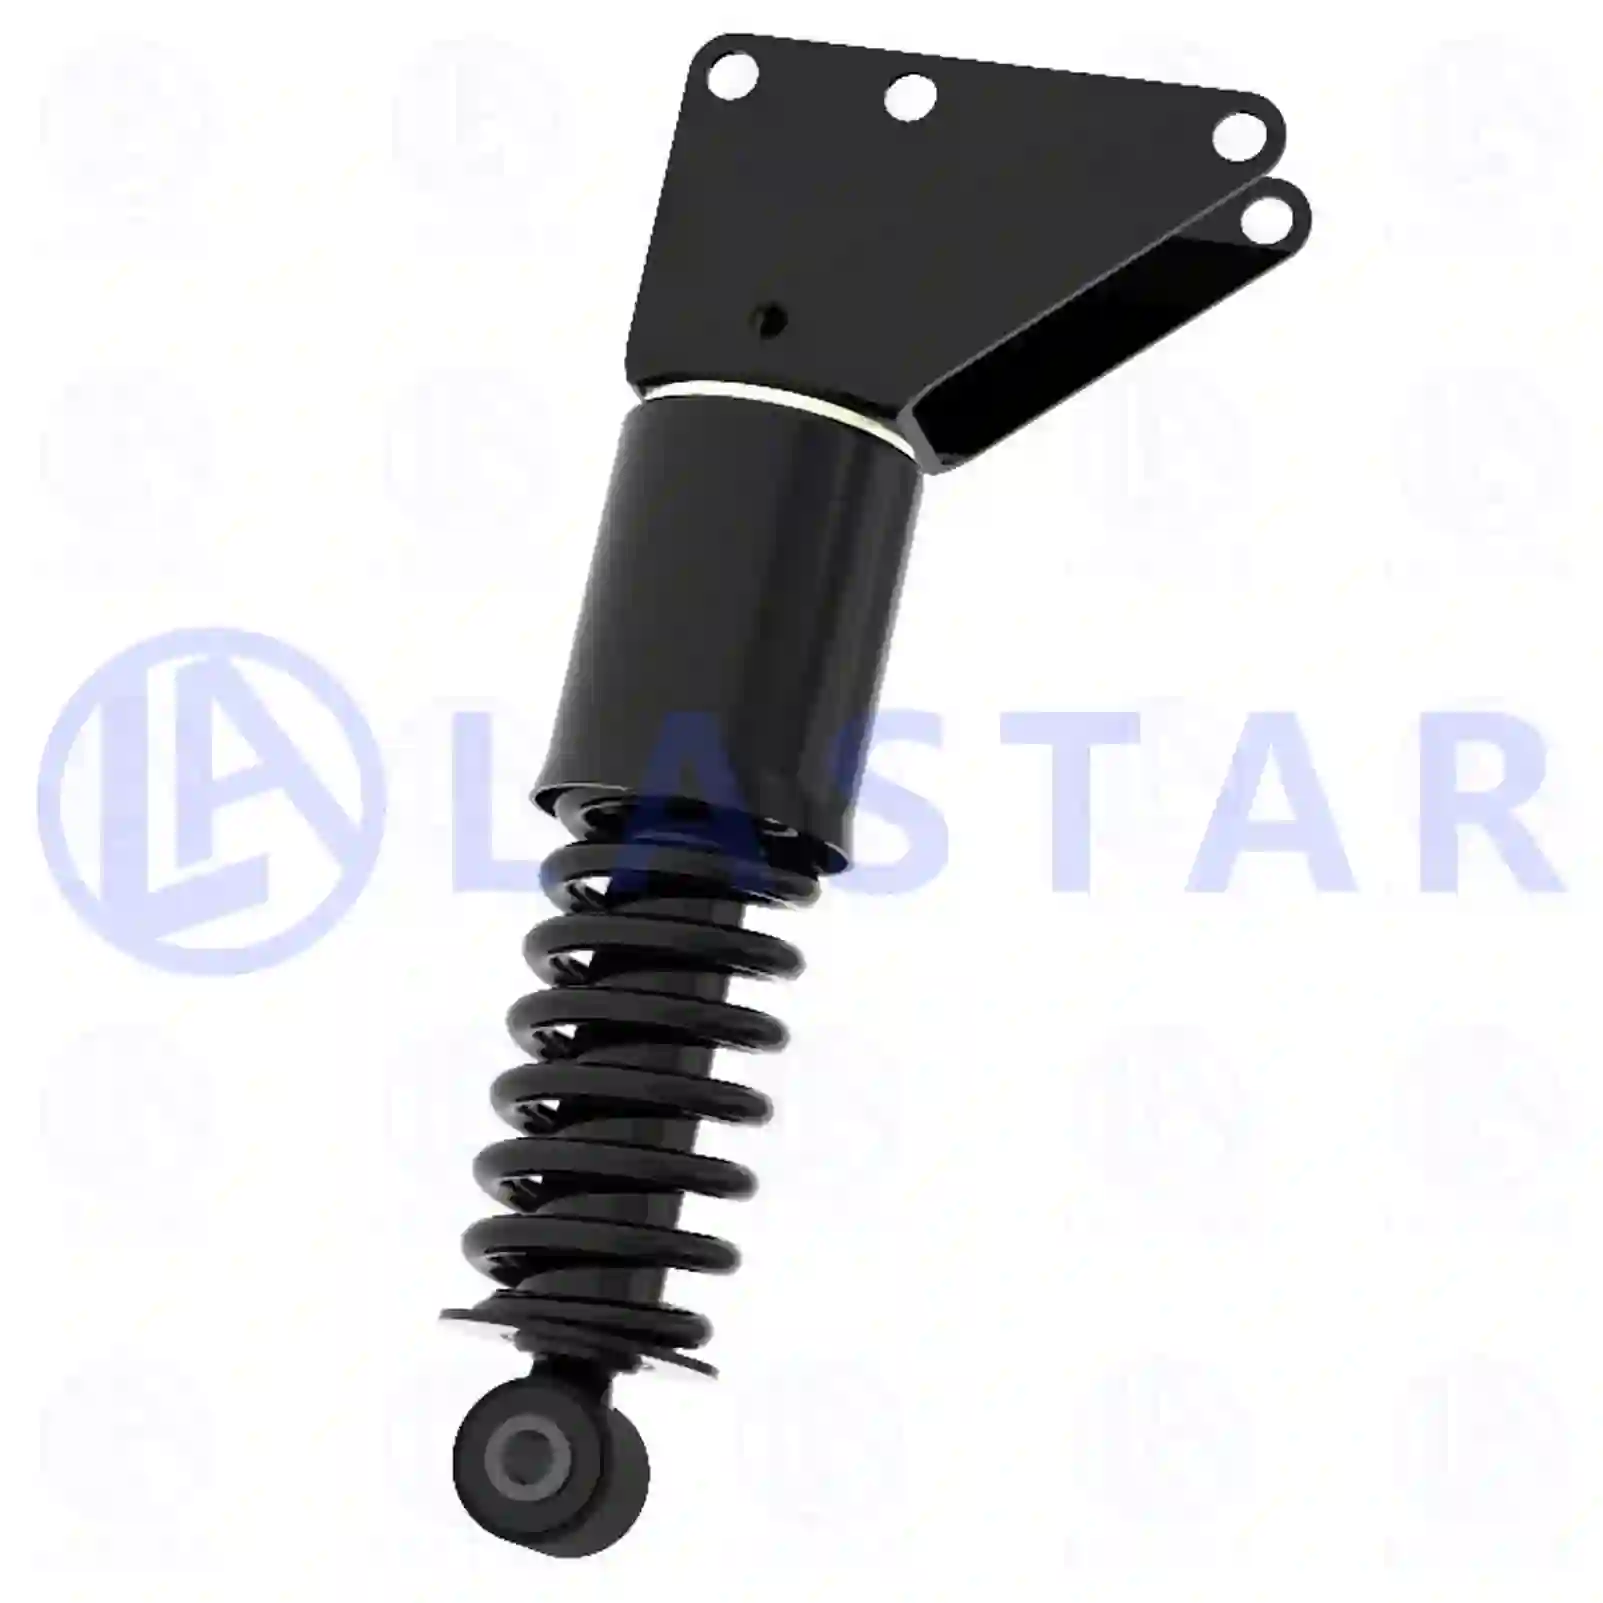 Cabin shock absorber, 77734917, 9438904619, 94389 ||  77734917 Lastar Spare Part | Truck Spare Parts, Auotomotive Spare Parts Cabin shock absorber, 77734917, 9438904619, 94389 ||  77734917 Lastar Spare Part | Truck Spare Parts, Auotomotive Spare Parts